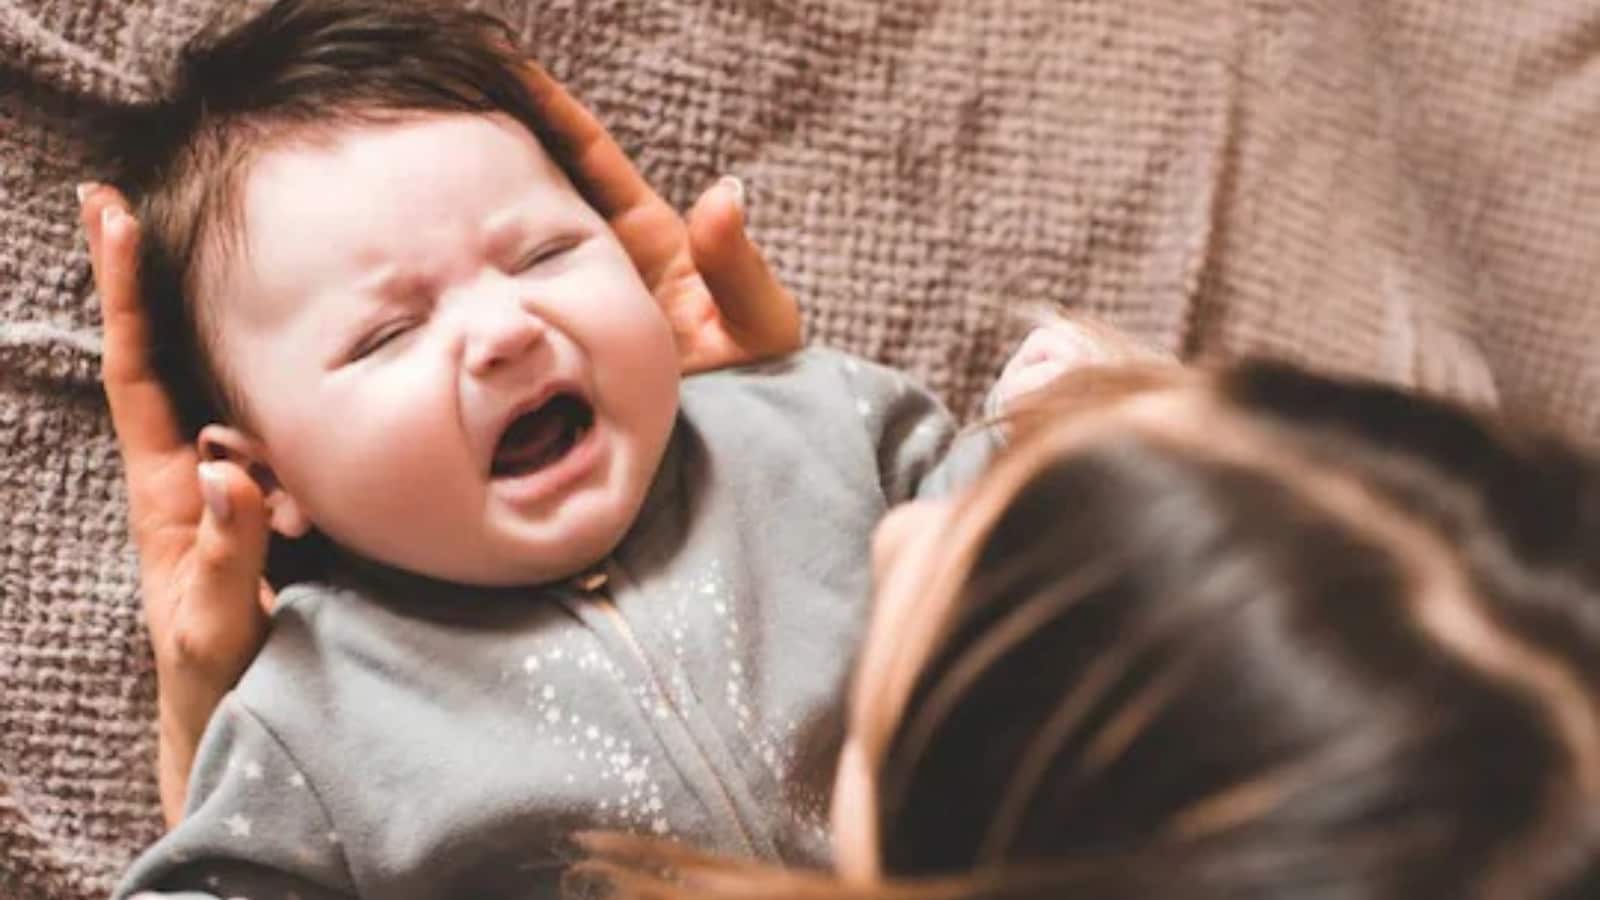 4 Ways to Bring Relief From Nasal Congestion for Newborns in Winters